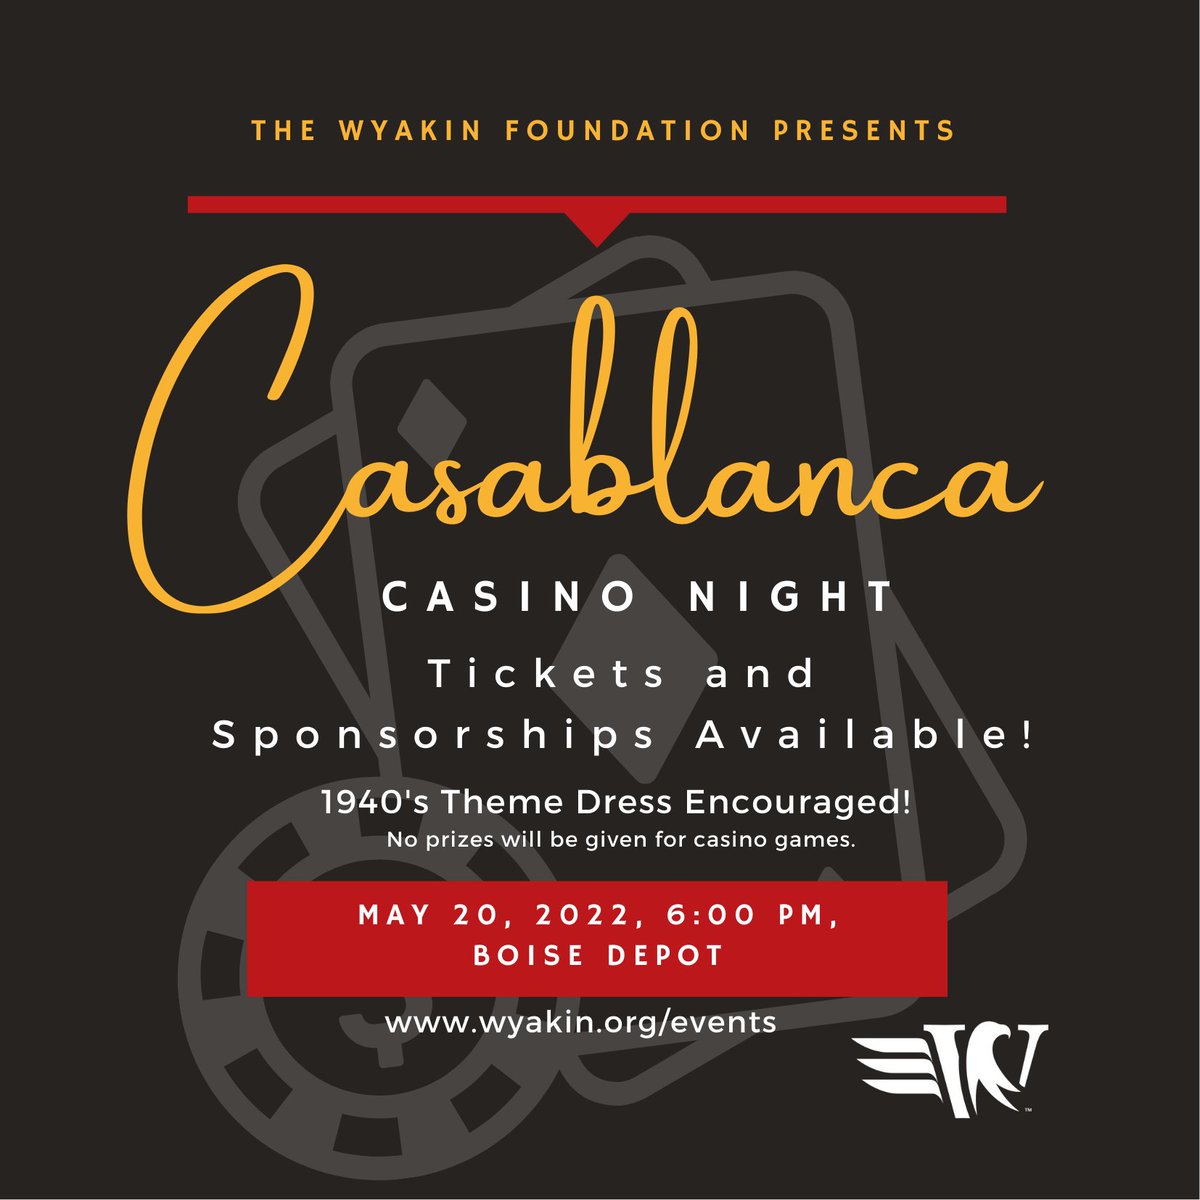 If you buy online in advance you can save up to 50% off. Promo Code Date50. Tickets will be sold at the door as well! bit.ly/Casinonight2022